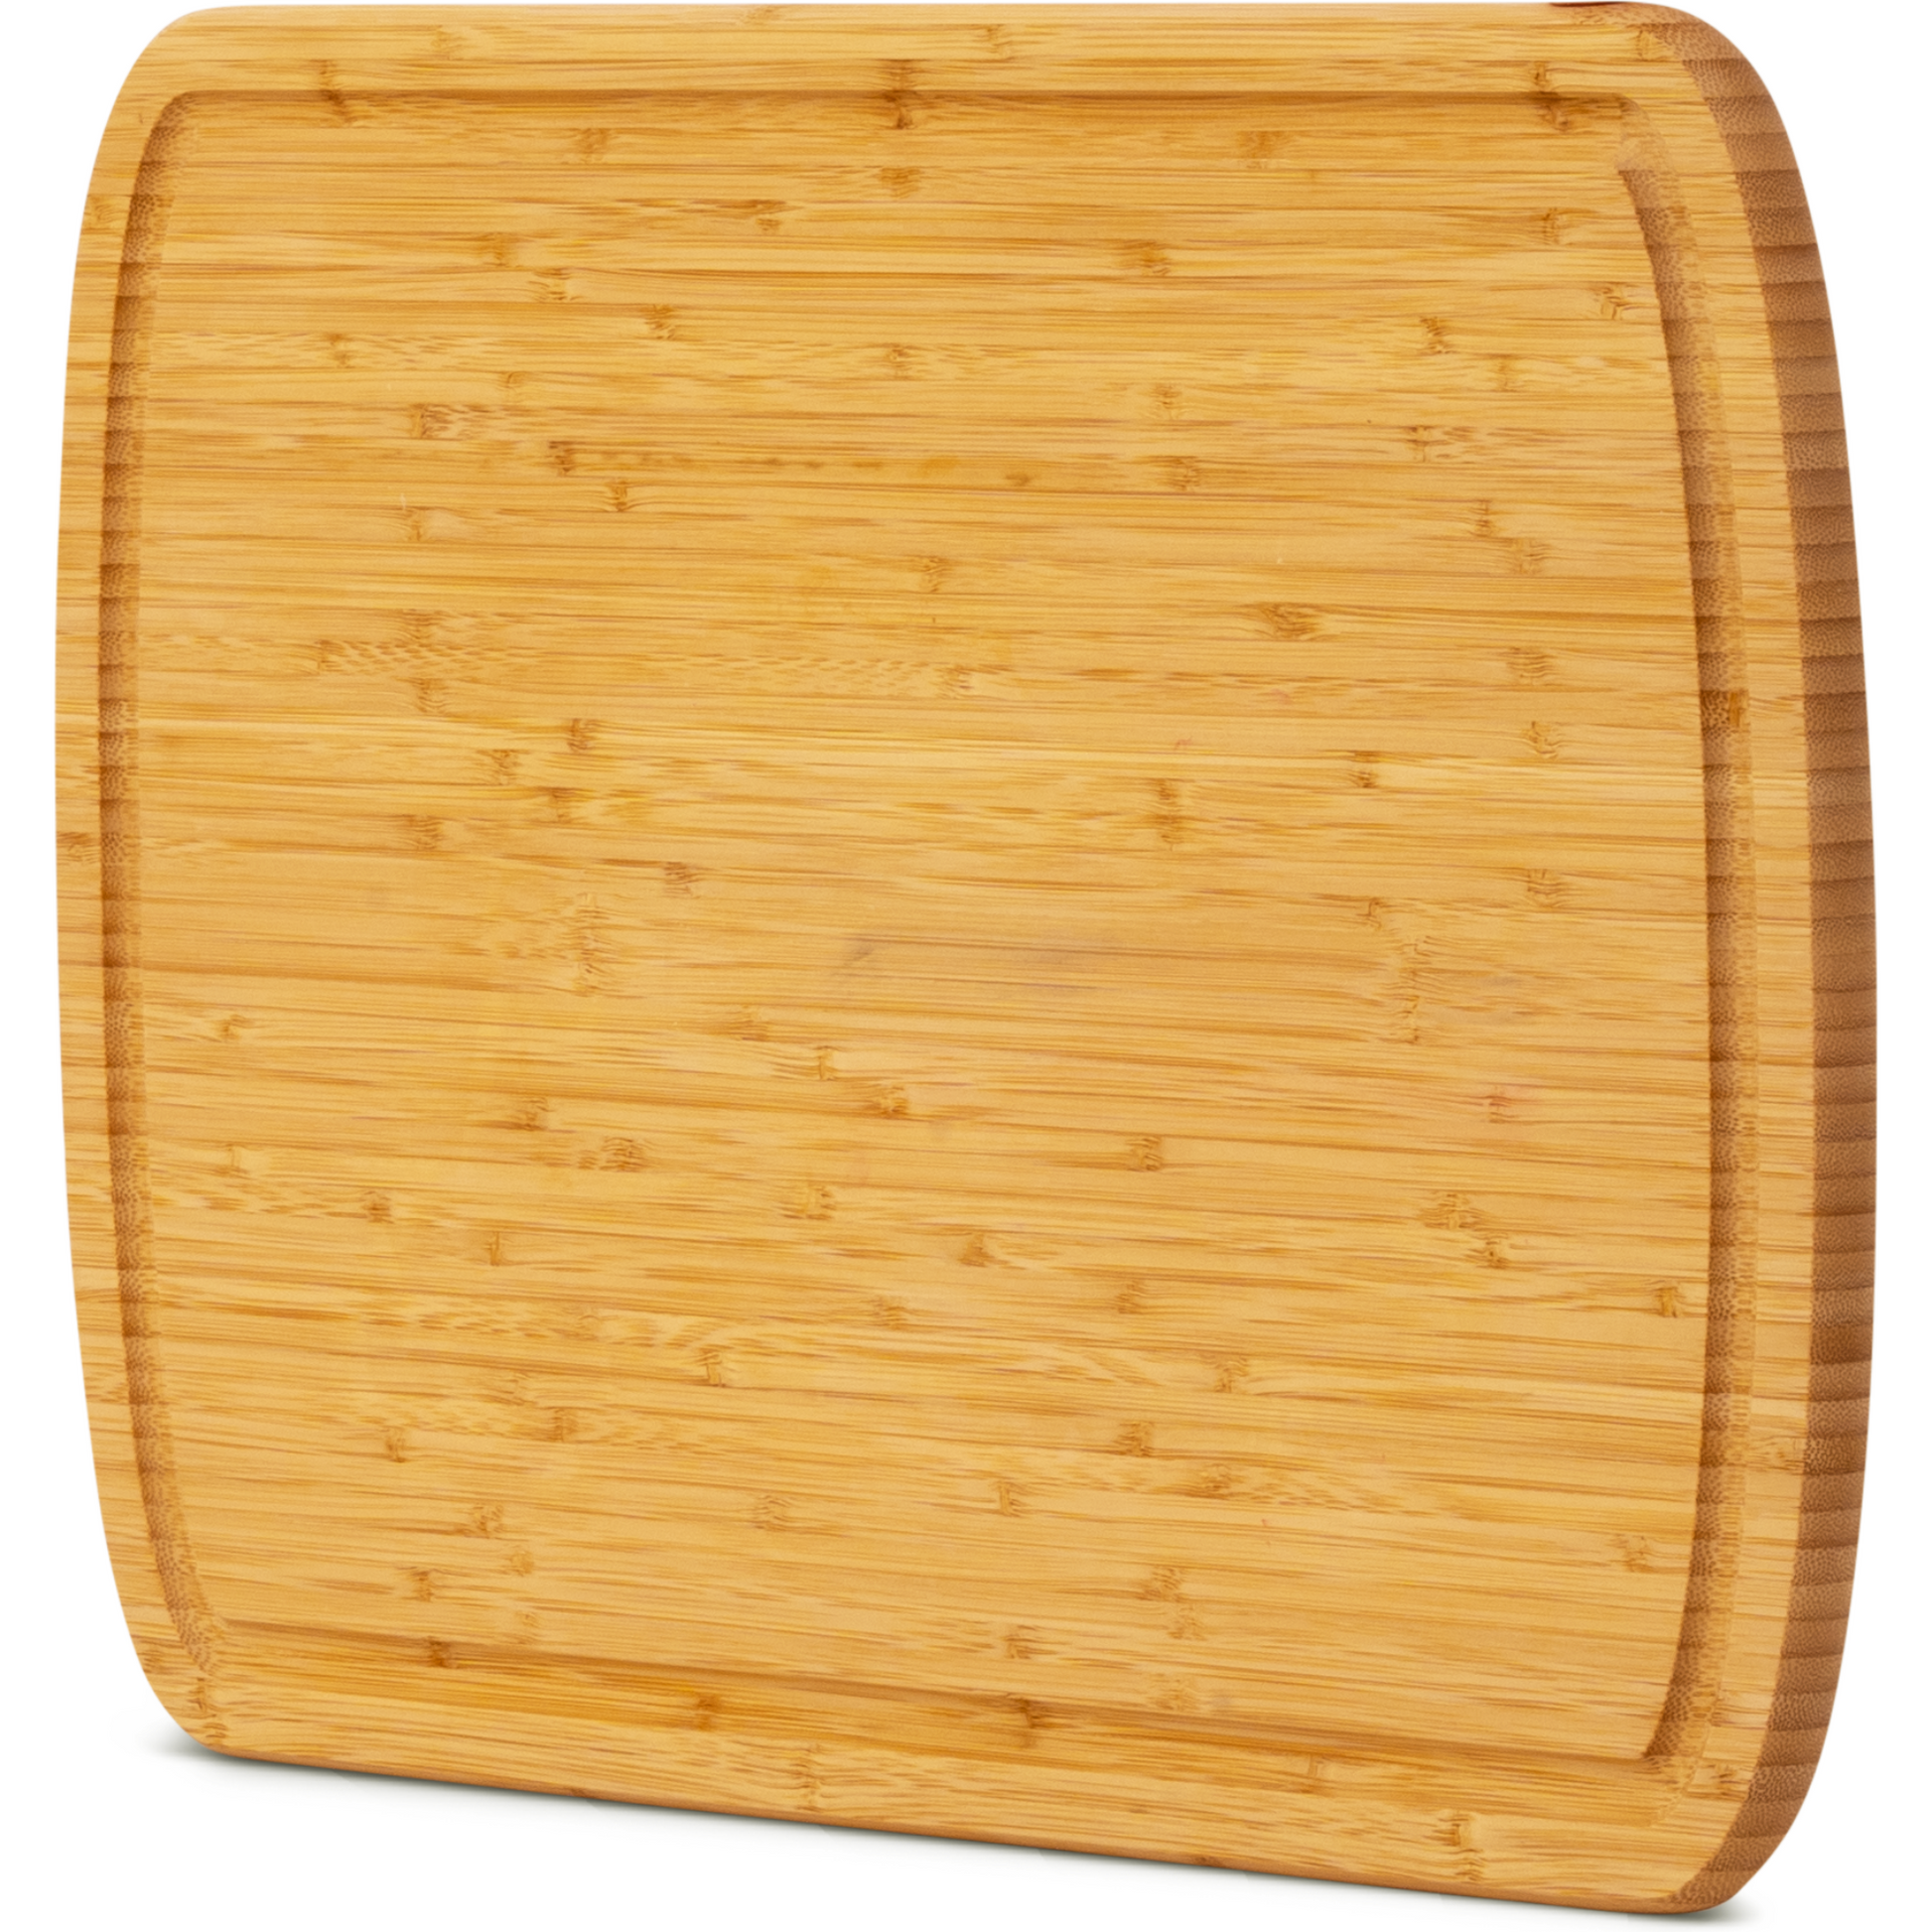 GREENER CHEF 18 Inch Extra Large Bamboo Cutting Board with Lifetime  Replacements - Wood XL Cutting Boards for Kitchen - Organic Wooden Butcher  Block